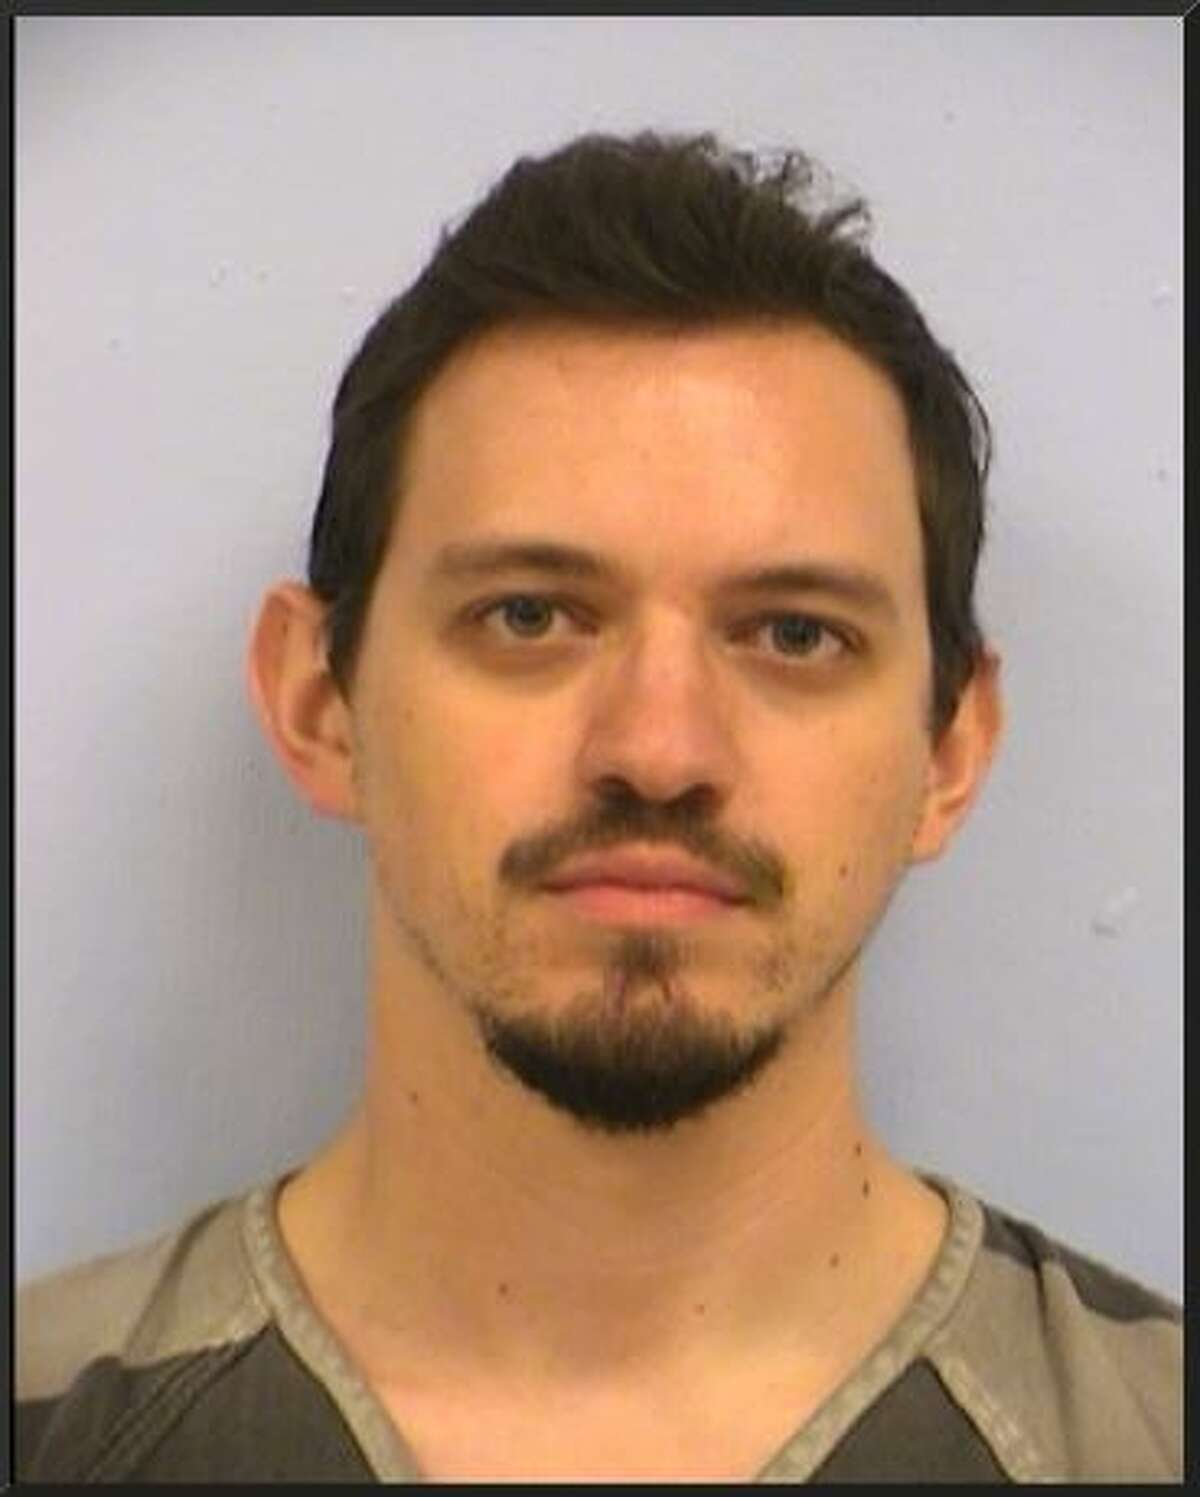 William Hamilton, 25, was arrested Feb. 12, 2017 and charged with public lewdness in Austin.